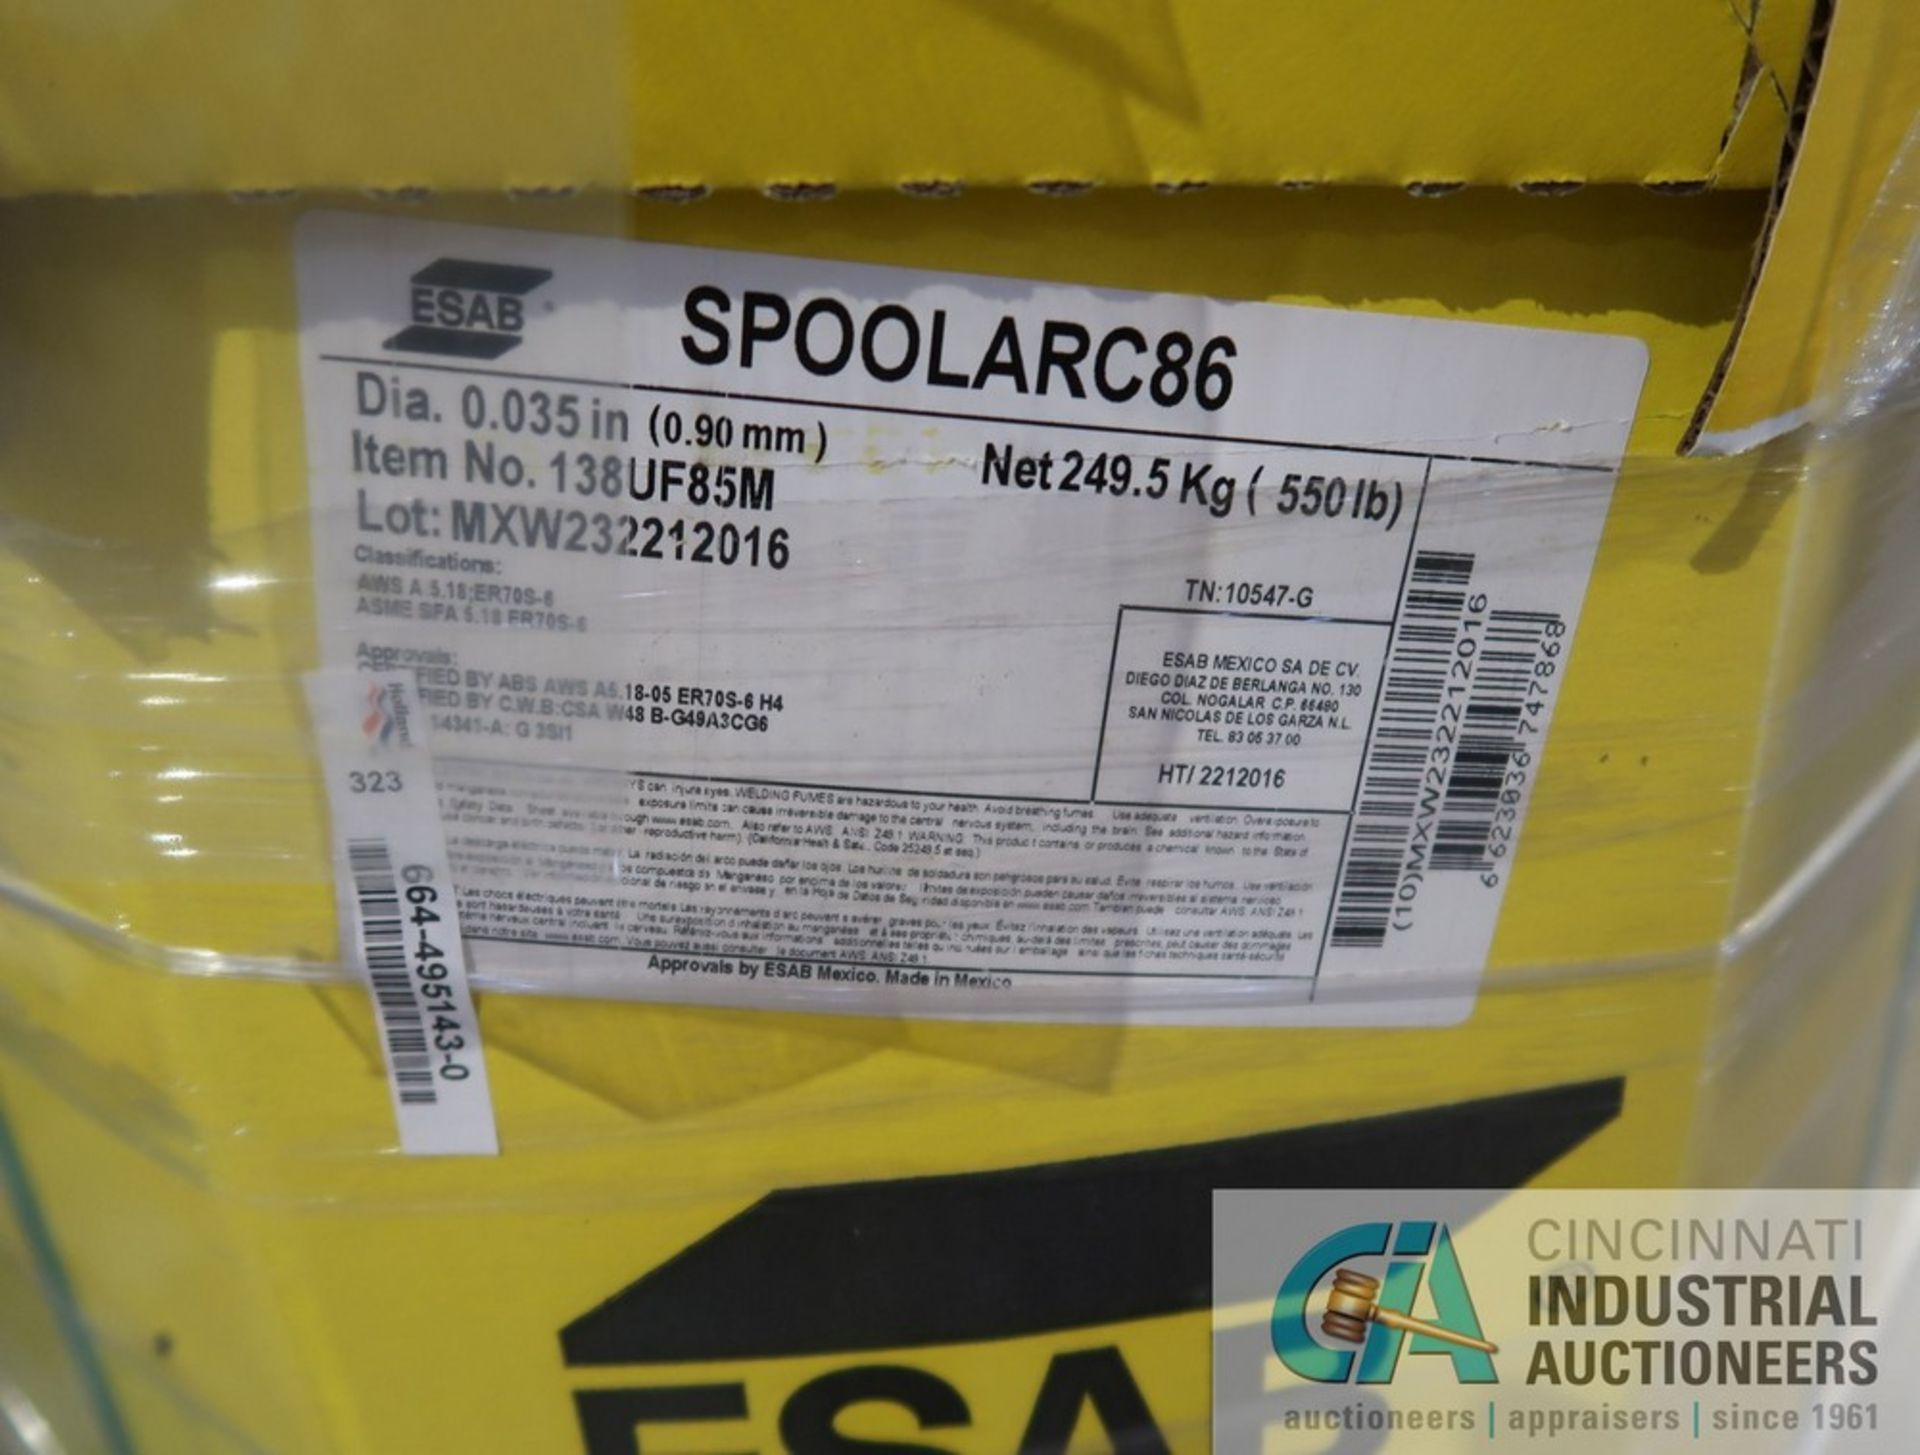 DUMS ESAB SPOOLARC 86 BRAND NEW WELDING WIRE **NEVER SKIDDED** - Image 2 of 2